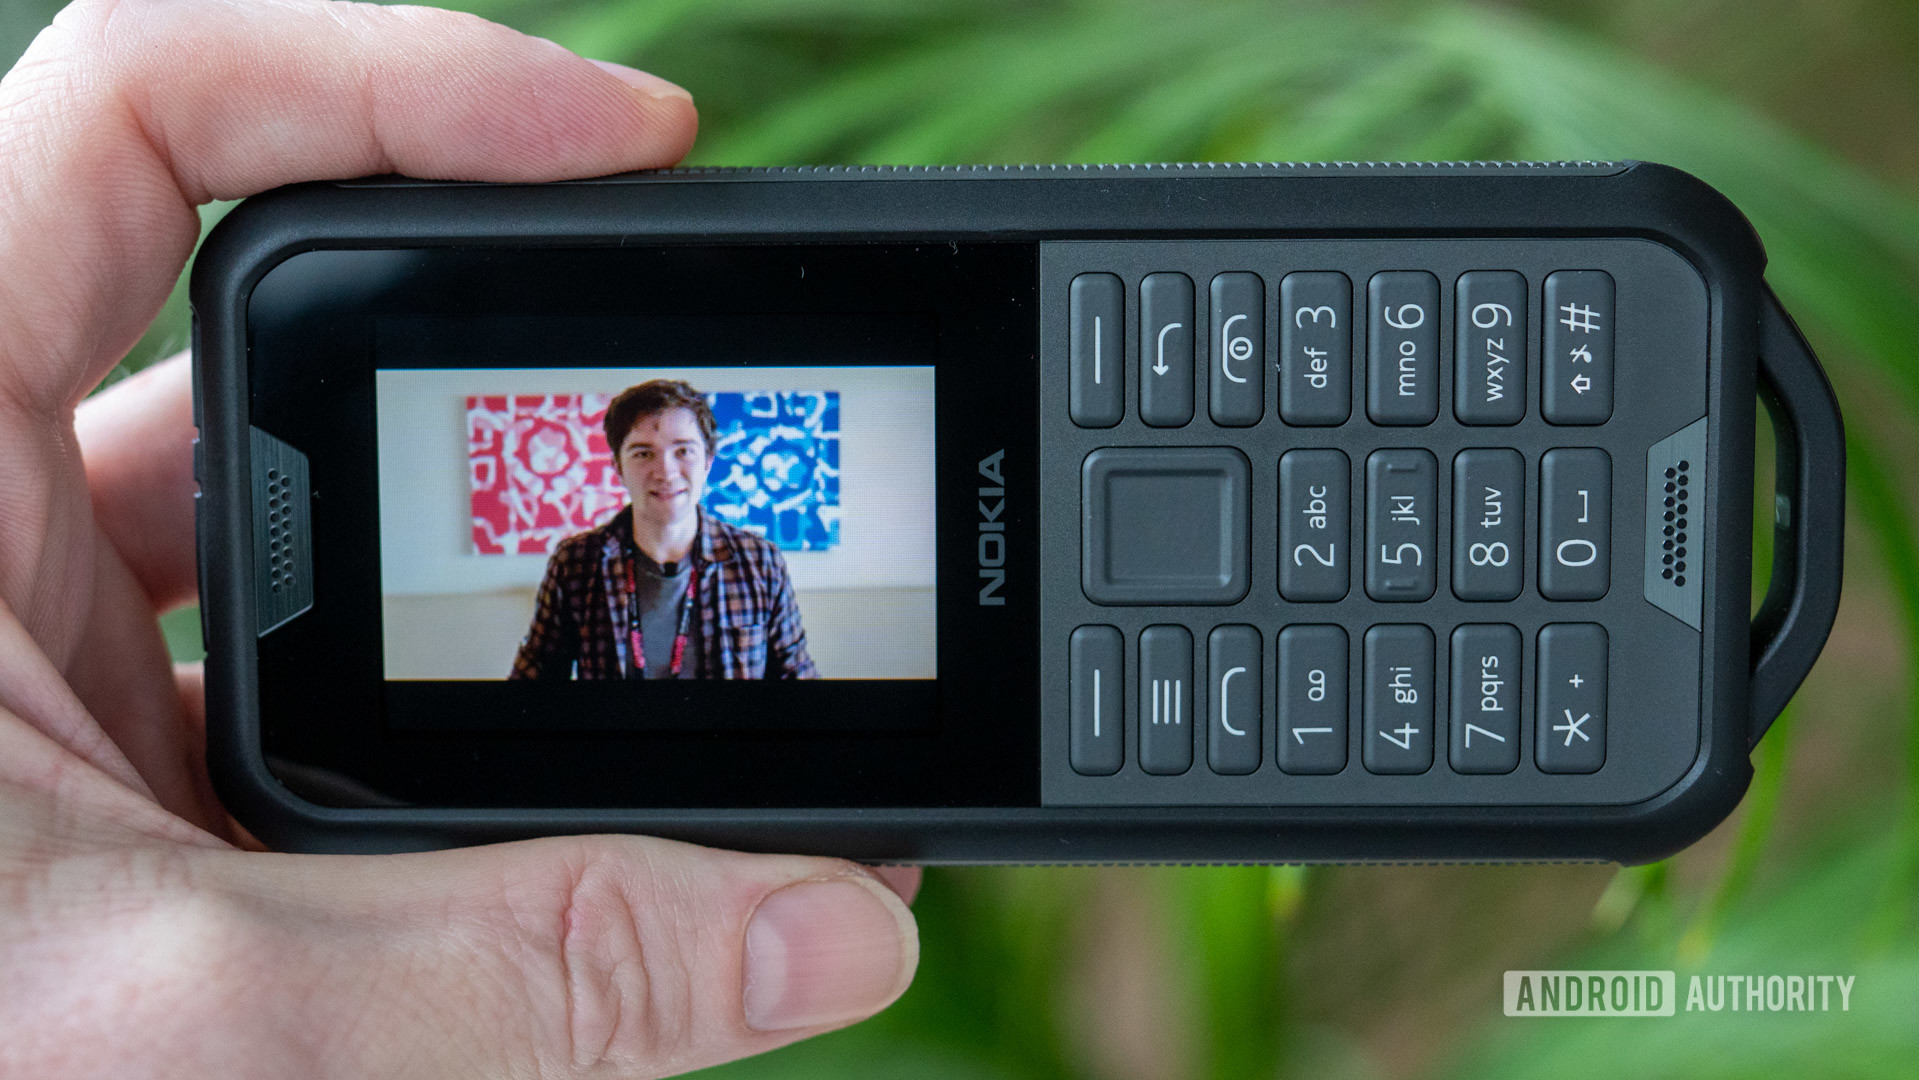 Image of a Nokia 800 Tough being held in sideways, with the screen facing left. The screen shows video of then-Android Authority reporter David Imel.